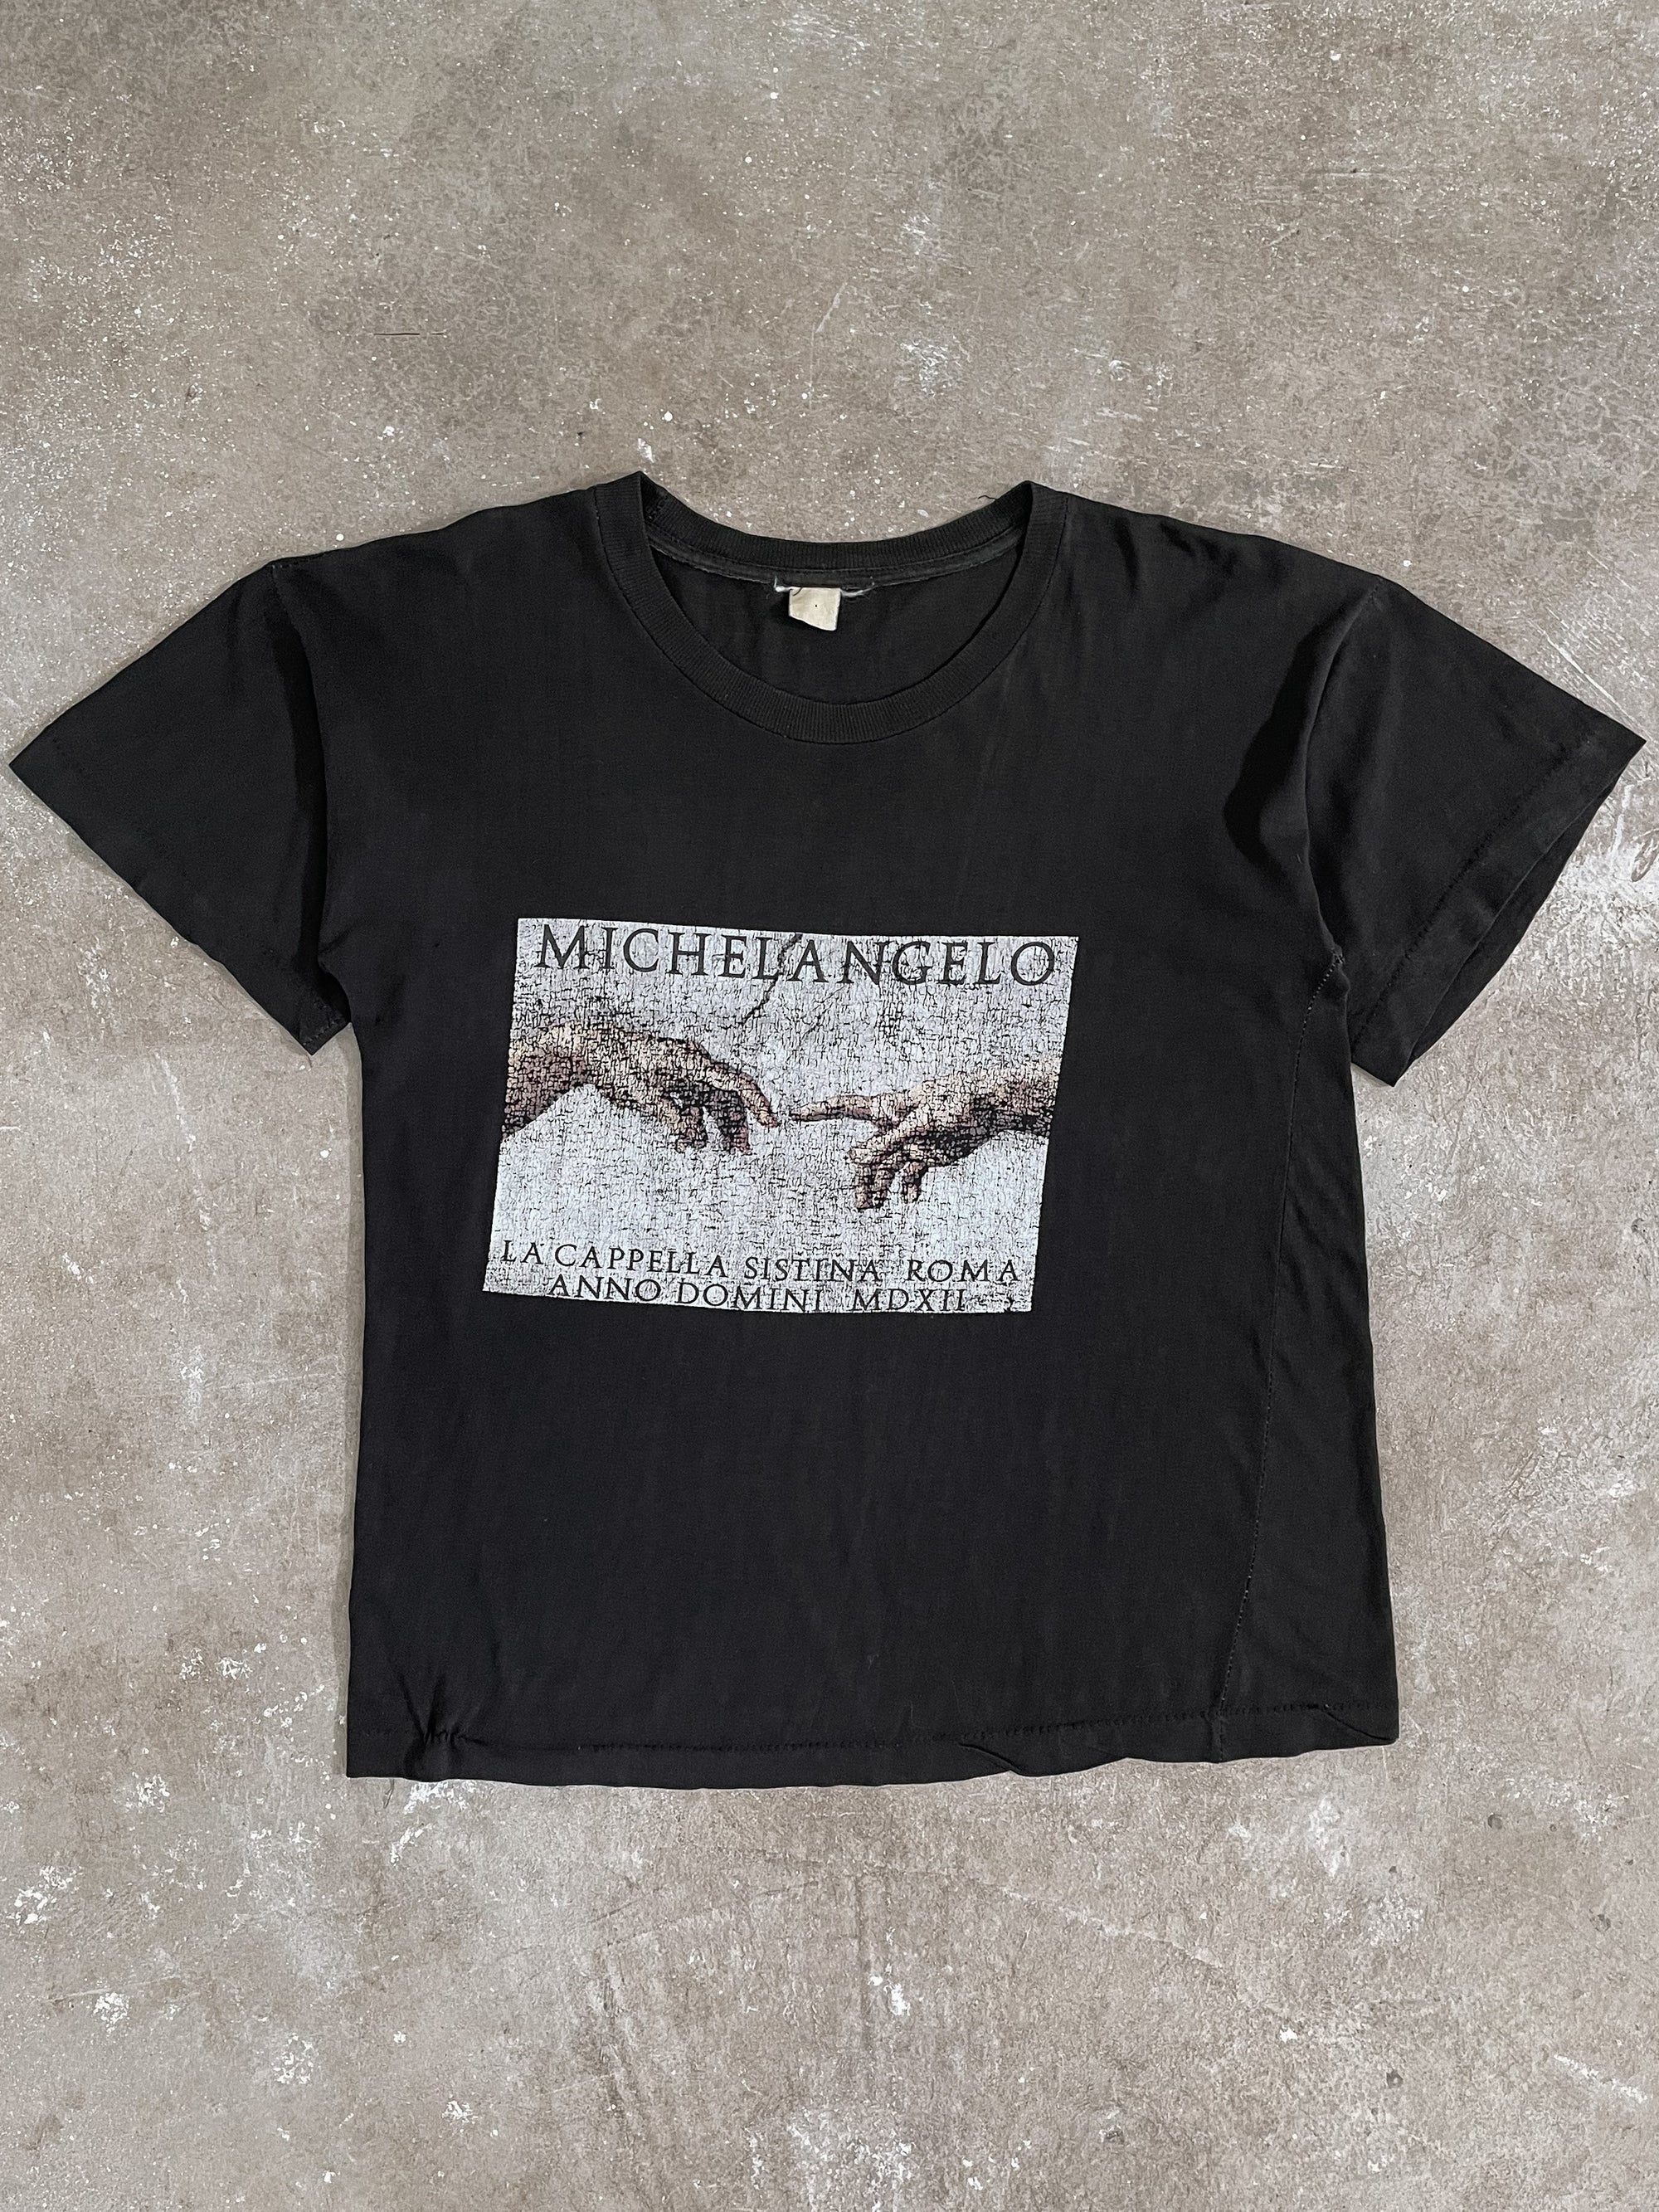 1980s/90s “Michelangelo” Single Stitched Tee (M)